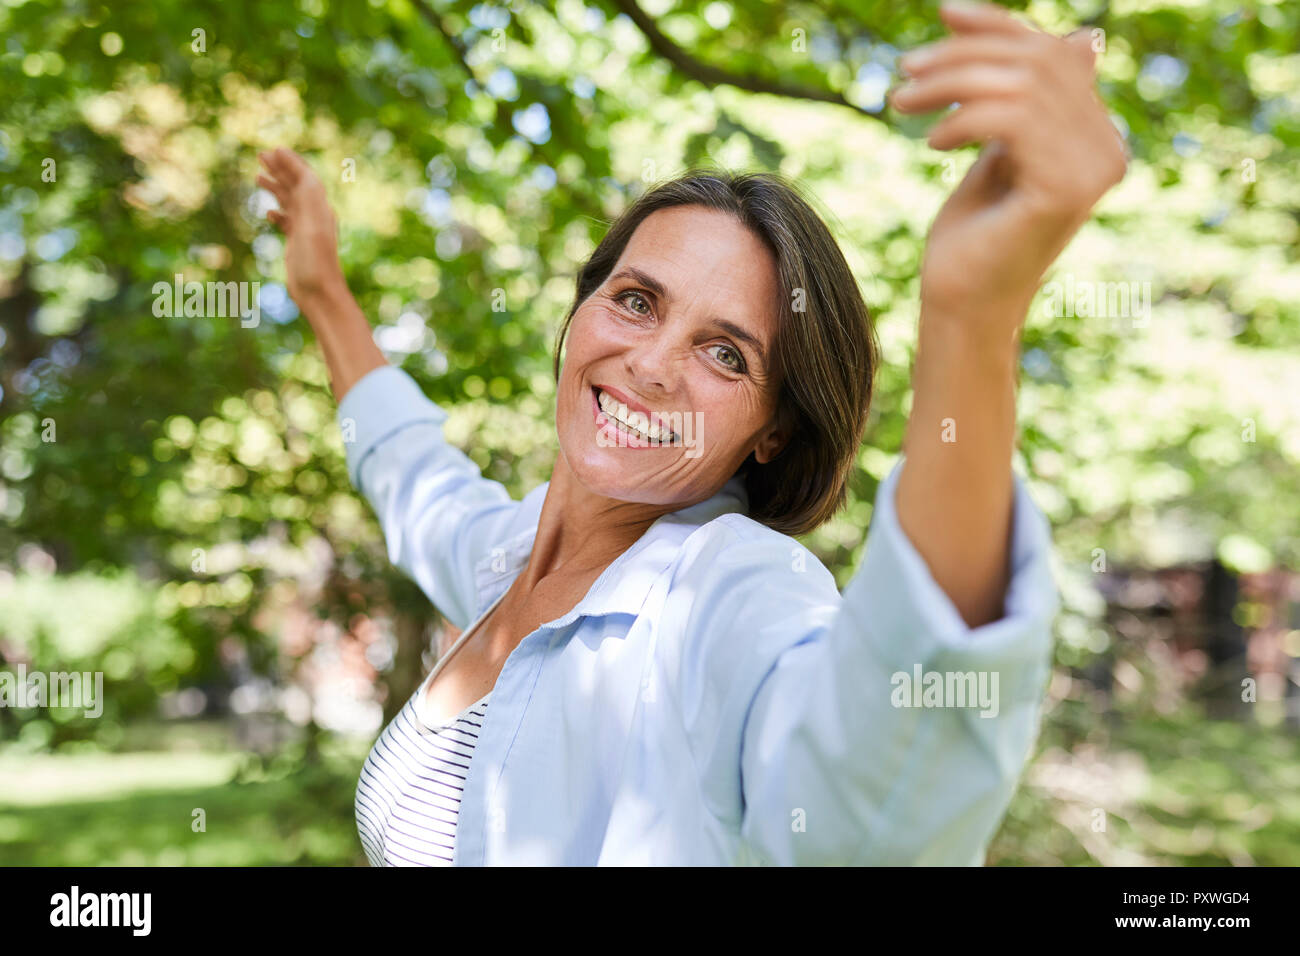 Portrait of smiling mature woman dancing in nature Banque D'Images